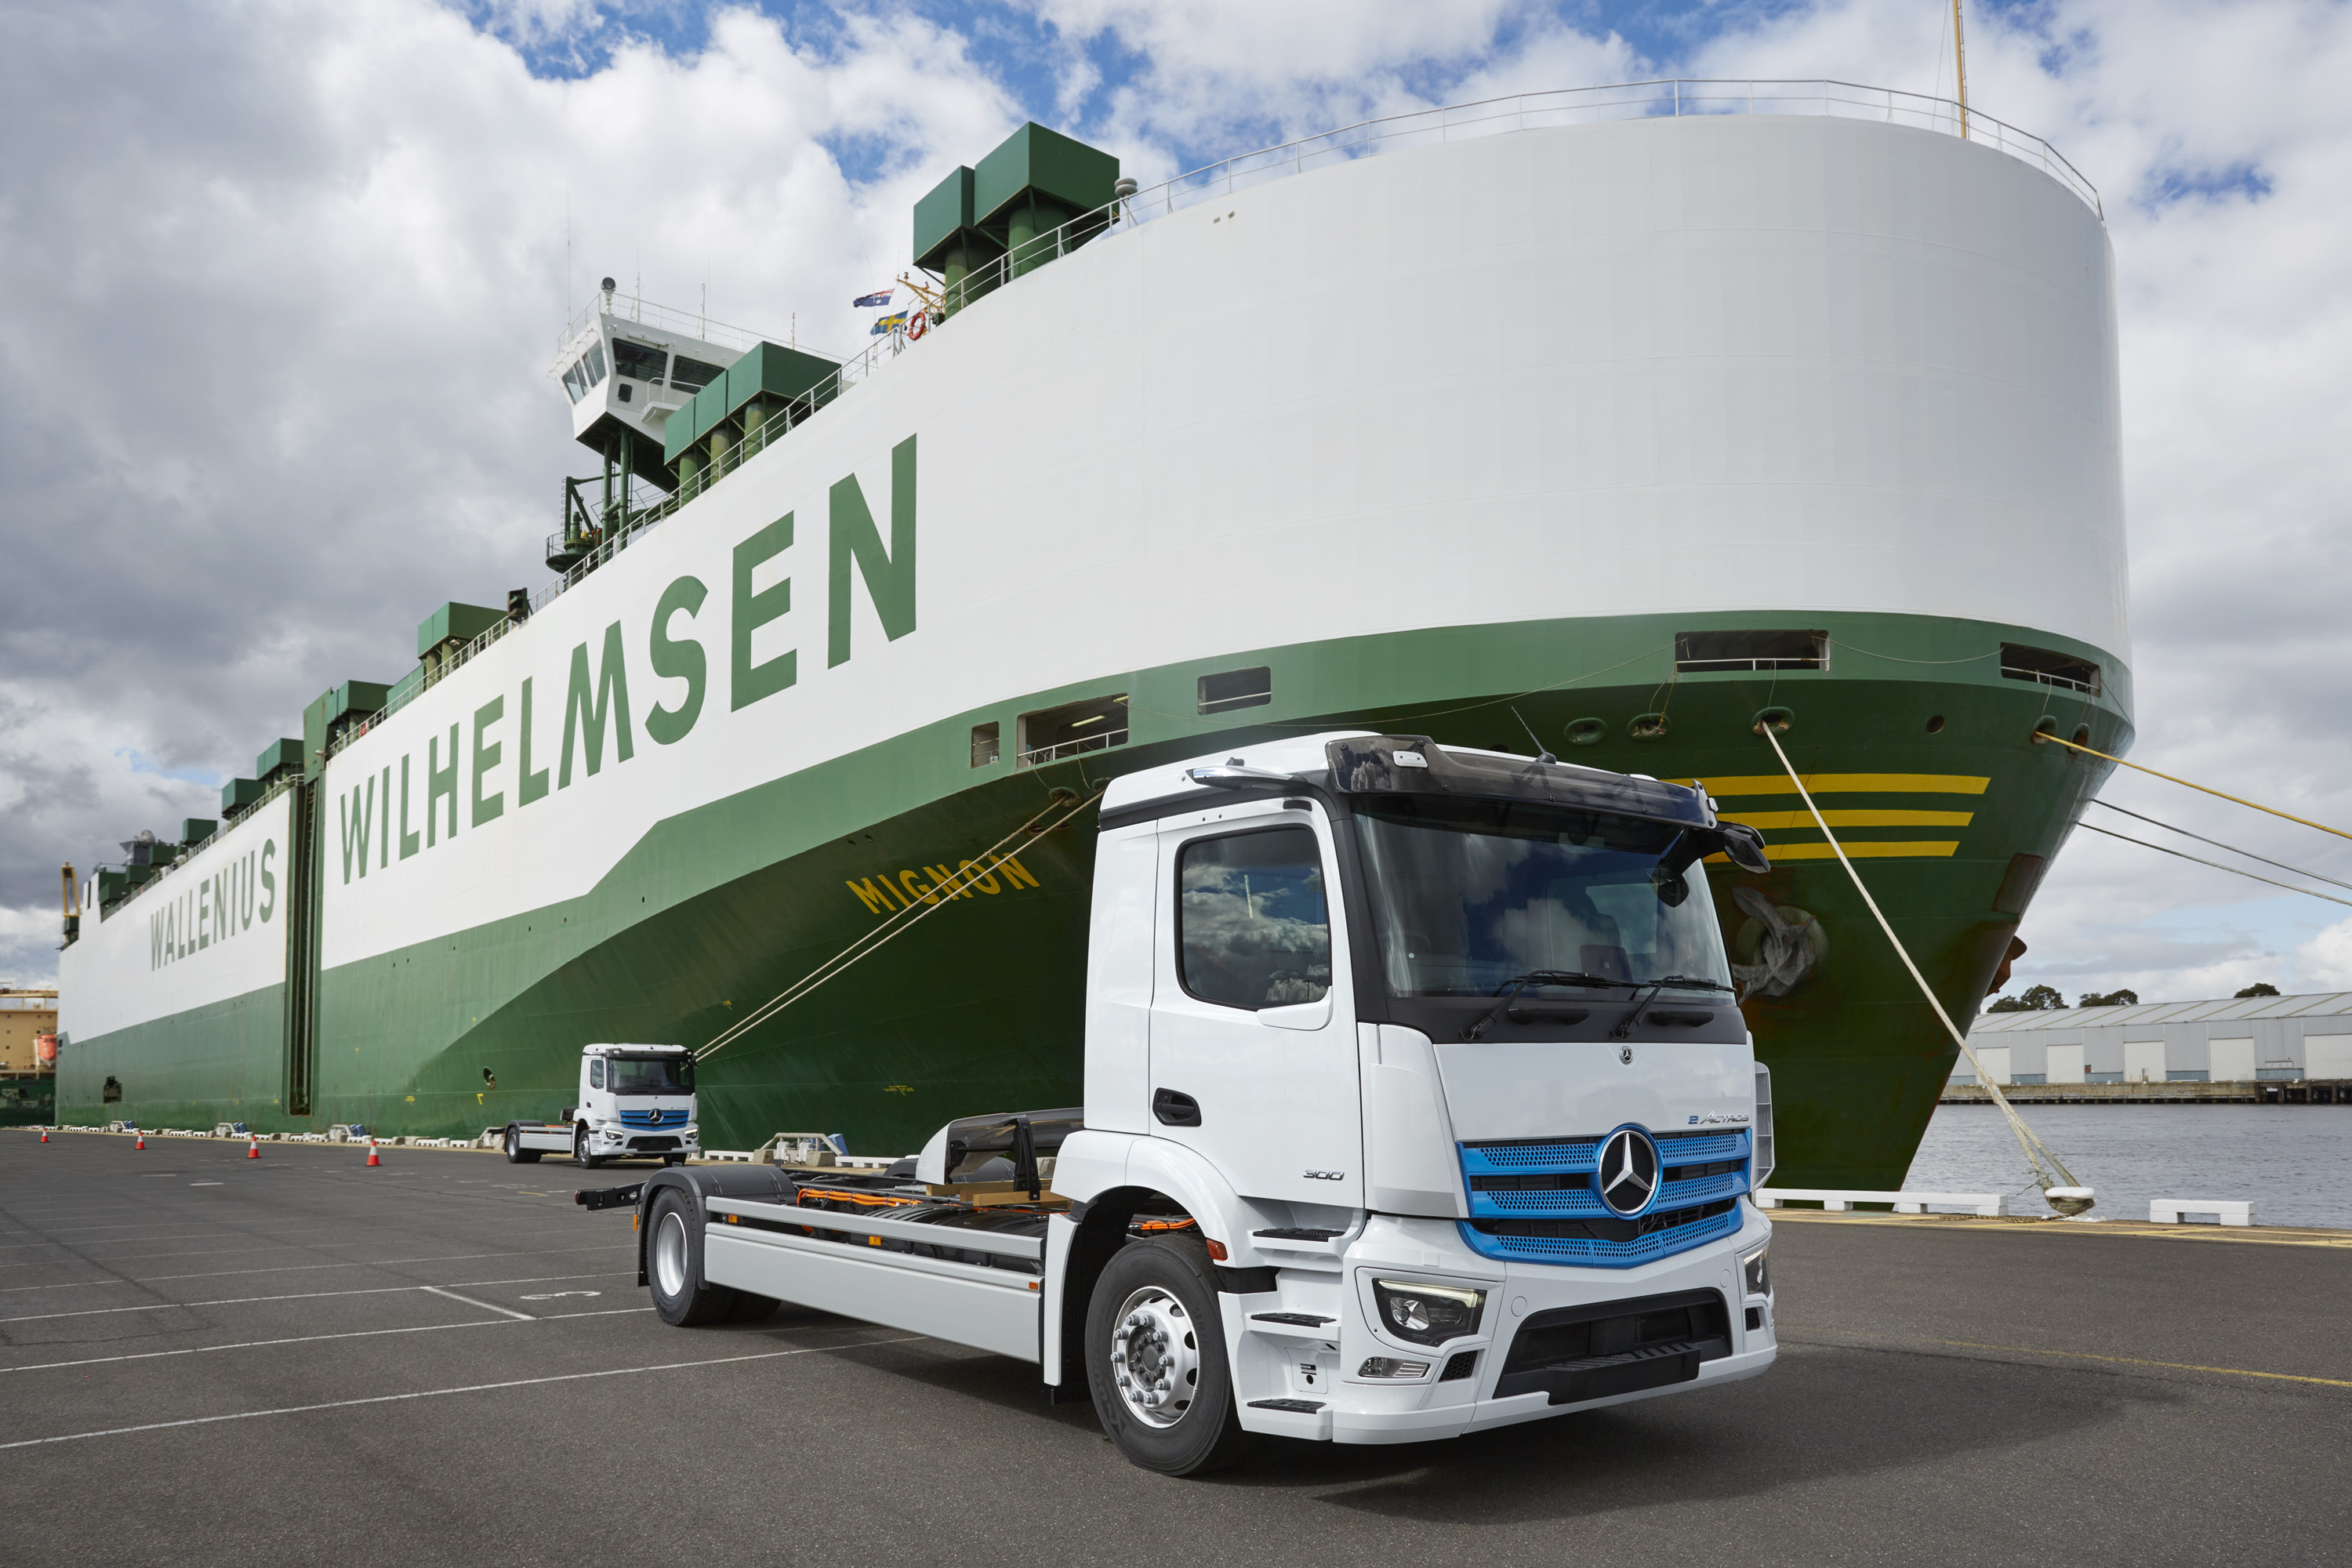 Brisbane Truck Show debut for electric eActros from Mercedes-Benz Trucks